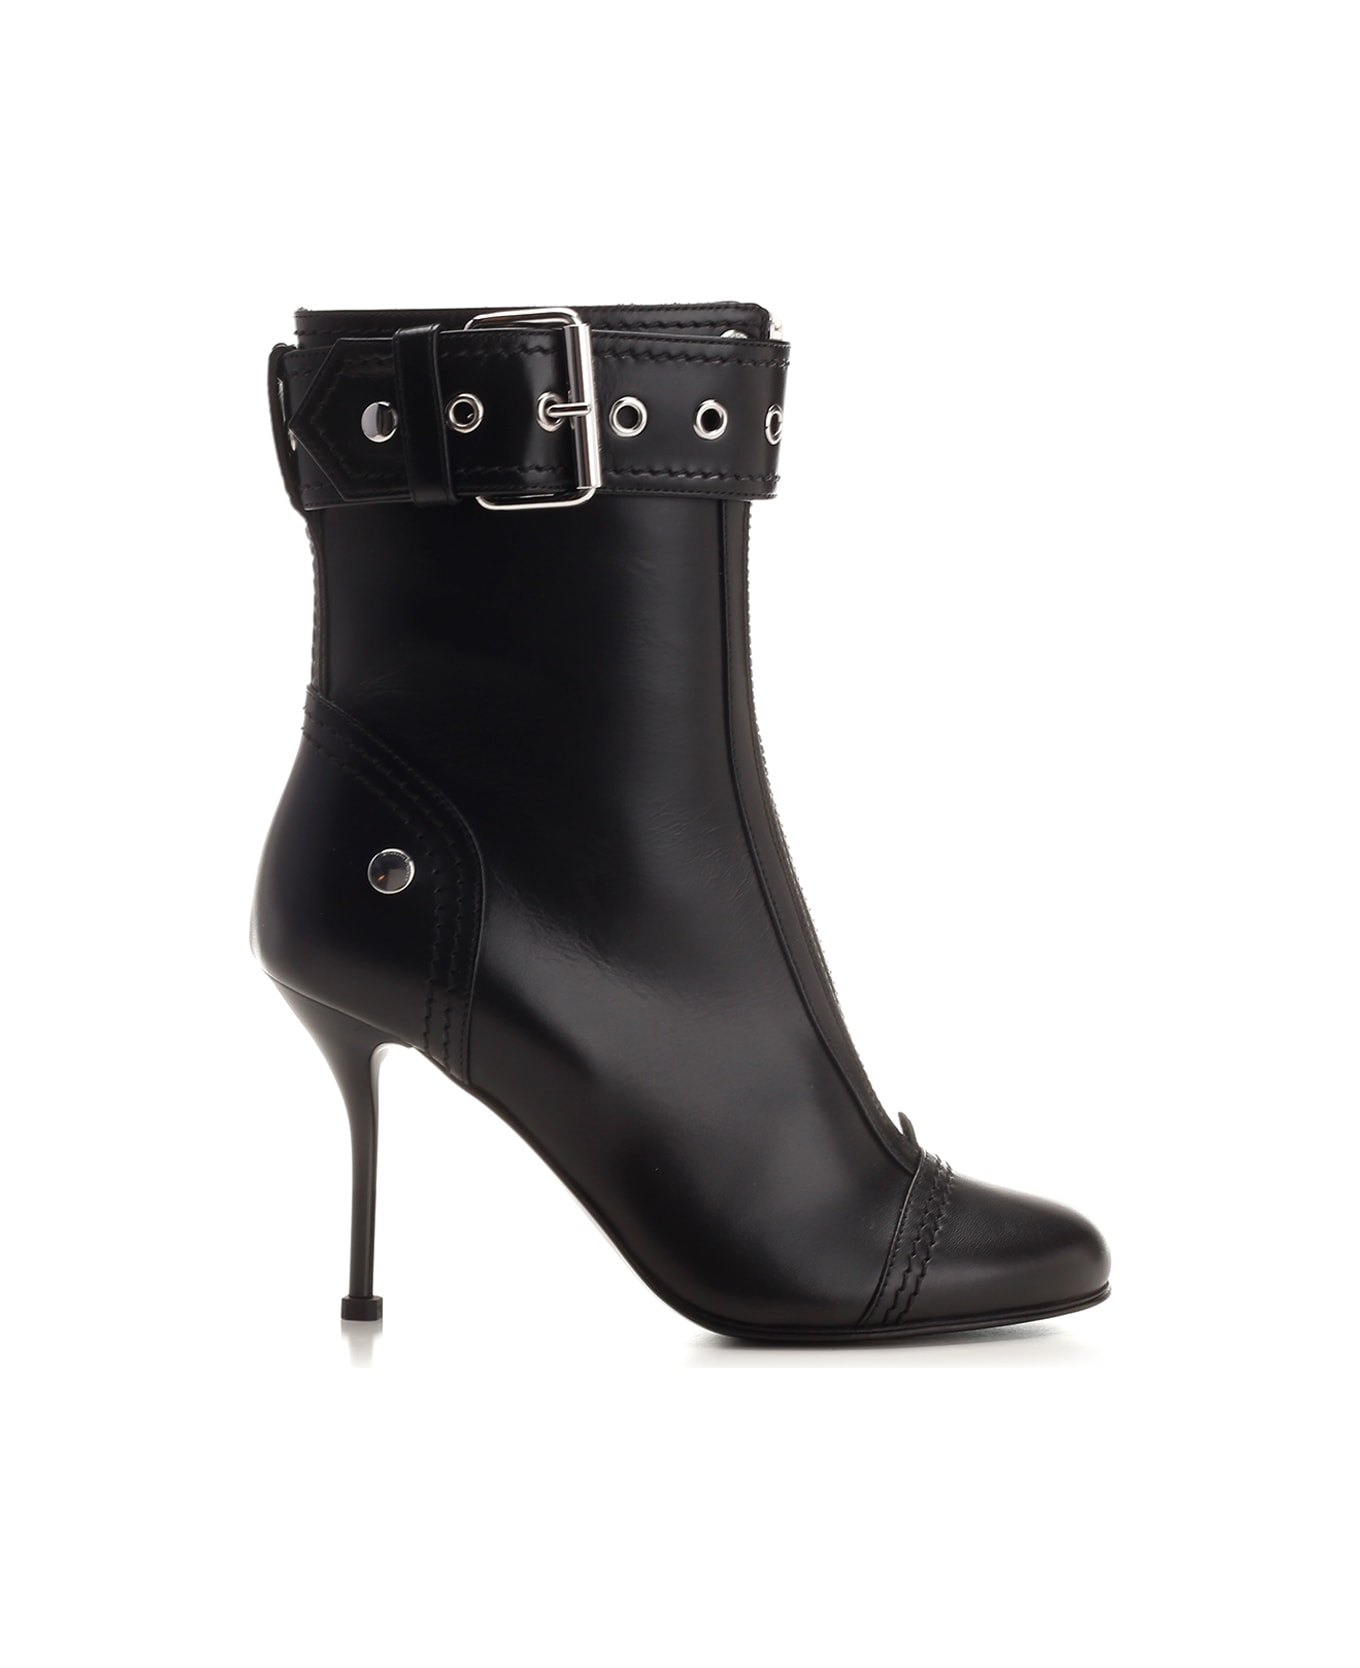 Alexander McQueen Leather Ankle Boots - Black Silver